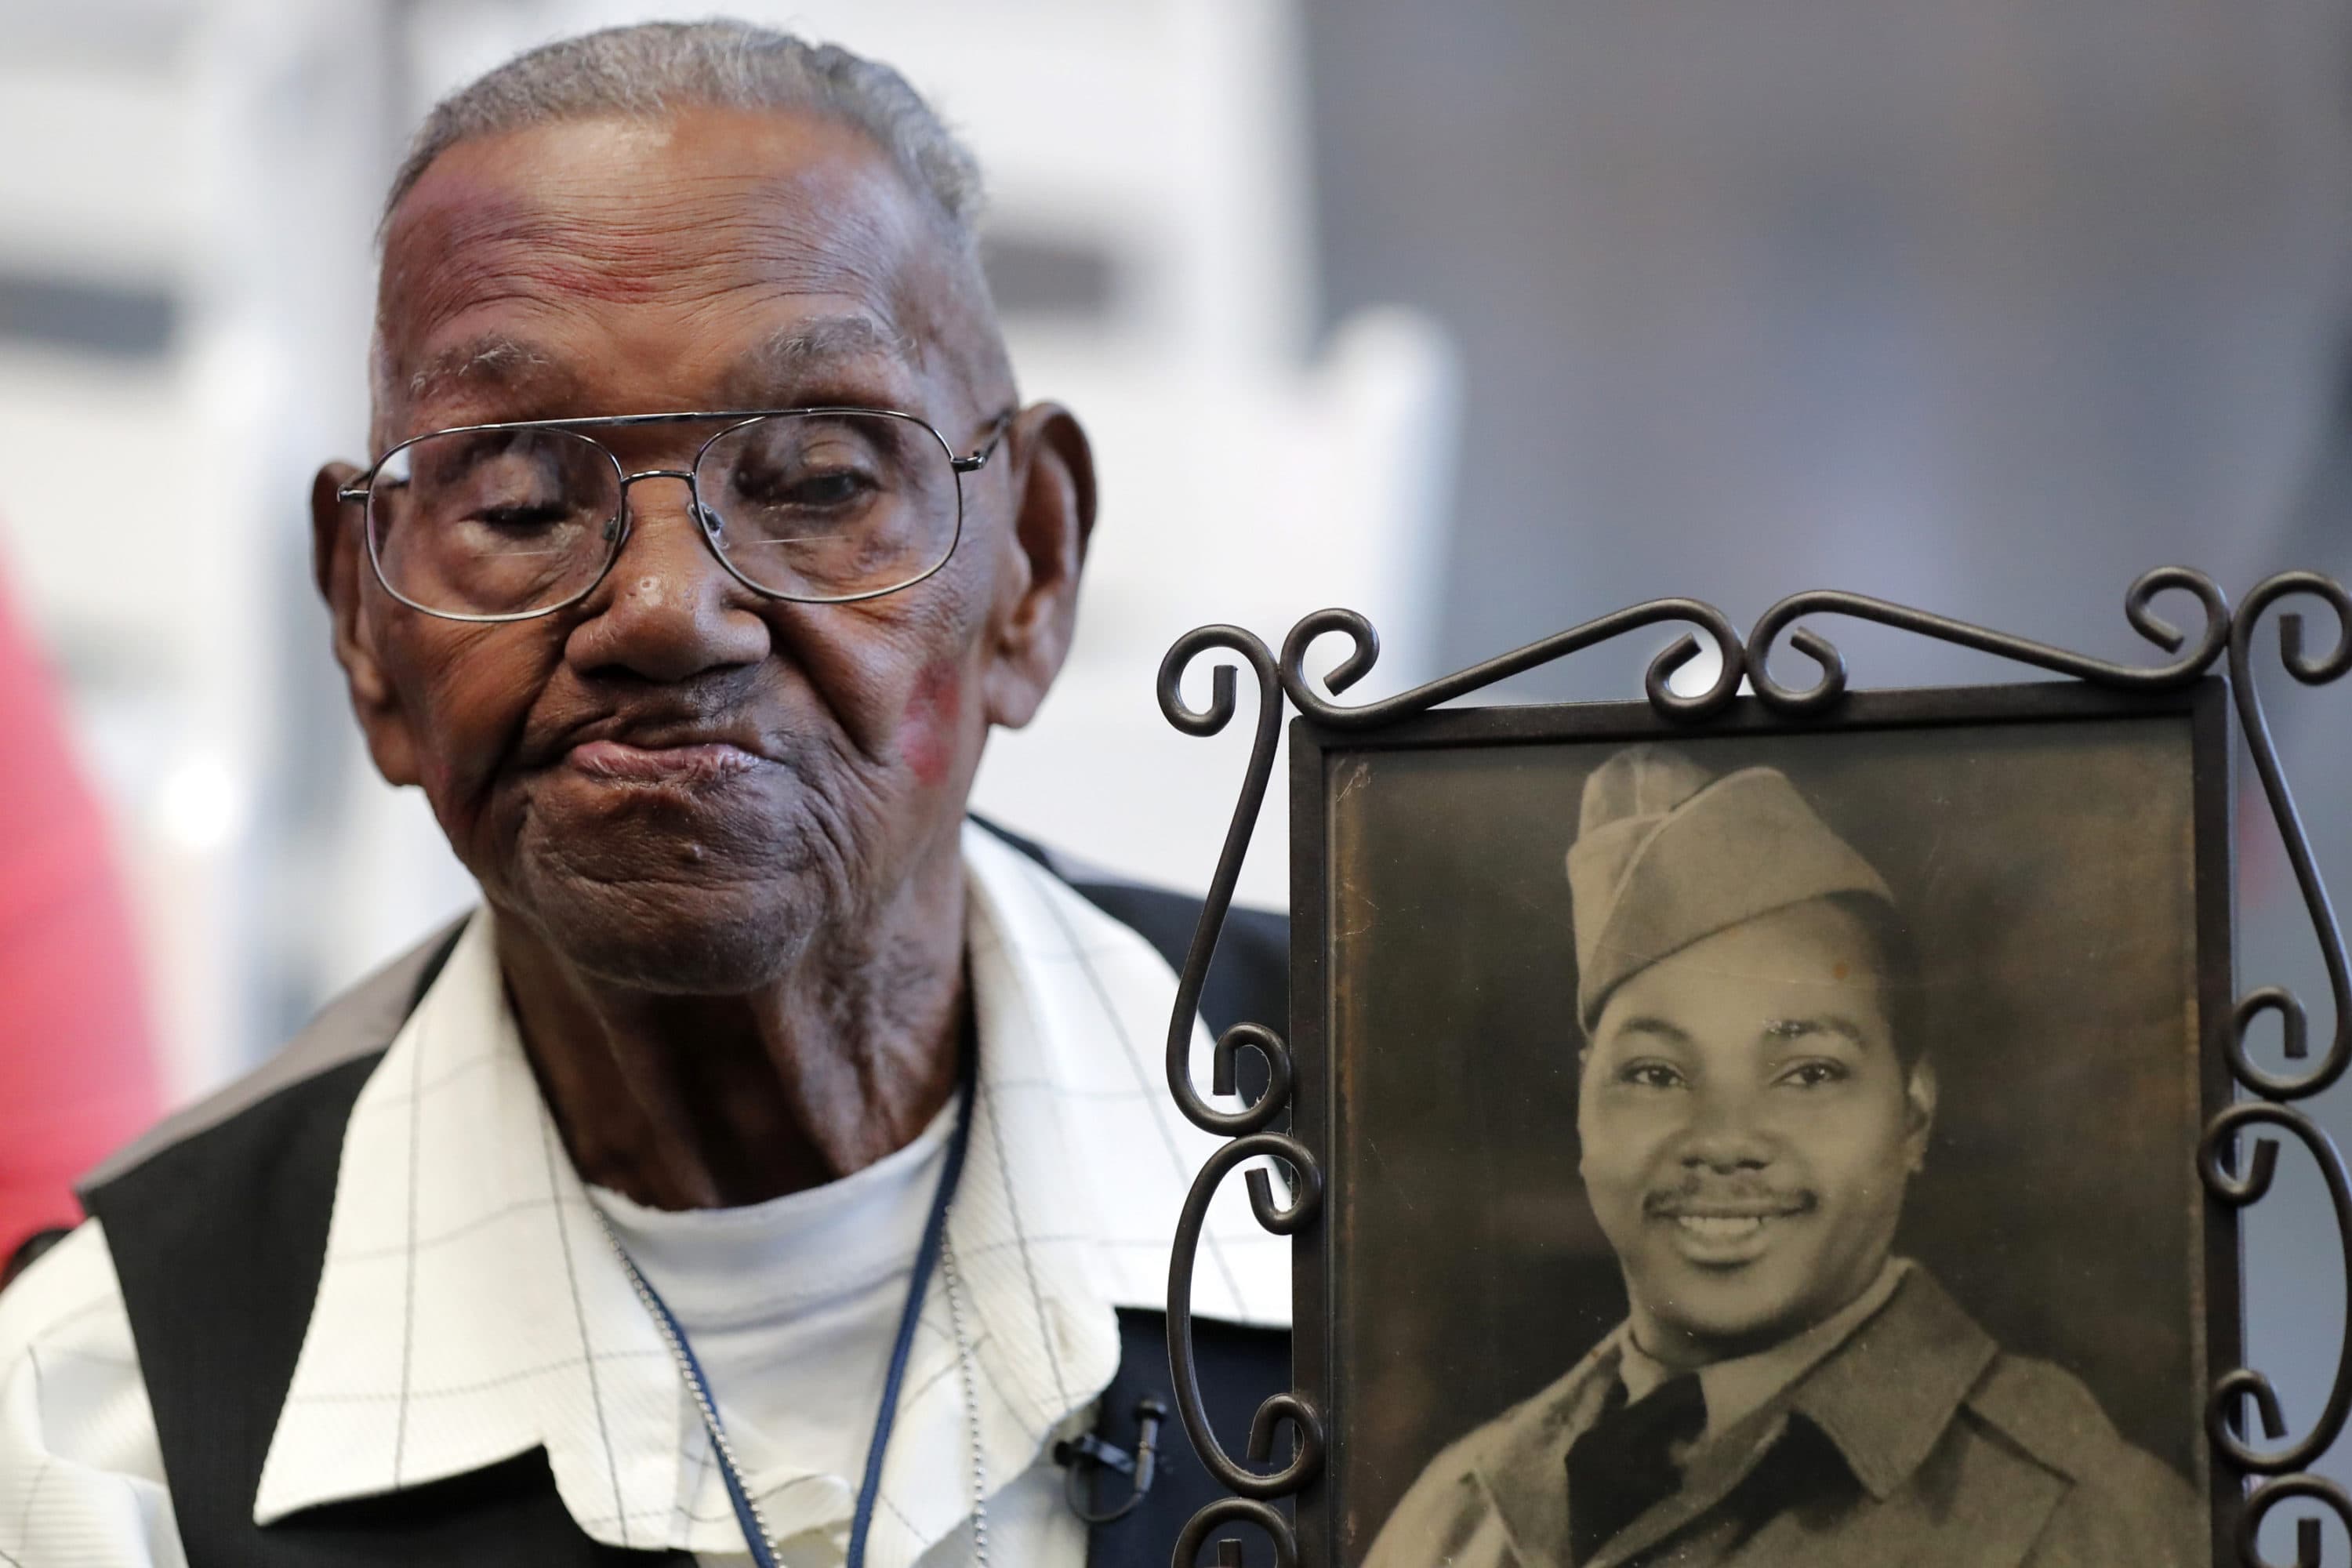 World War II veteran Lawrence Brooks holds a photo of him taken in 1943, as he celebrates his 110th birthday at the National World War II Museum in New Orleans, on Sept. 12, 2019. (AP Photo/Gerald Herbert, File)